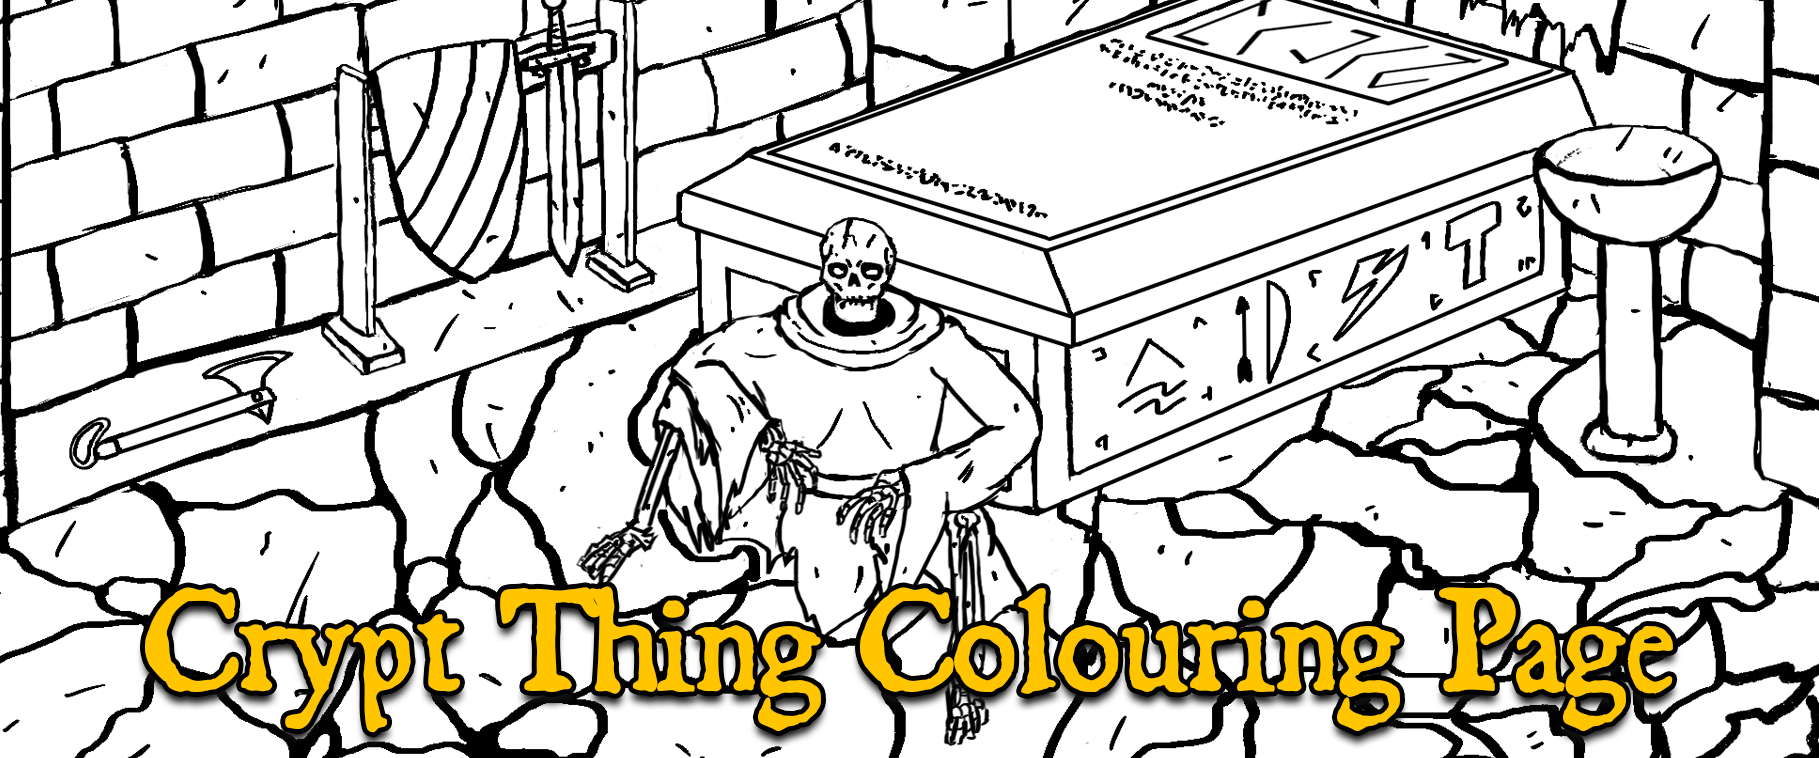 Crypt Thing Colouring Page